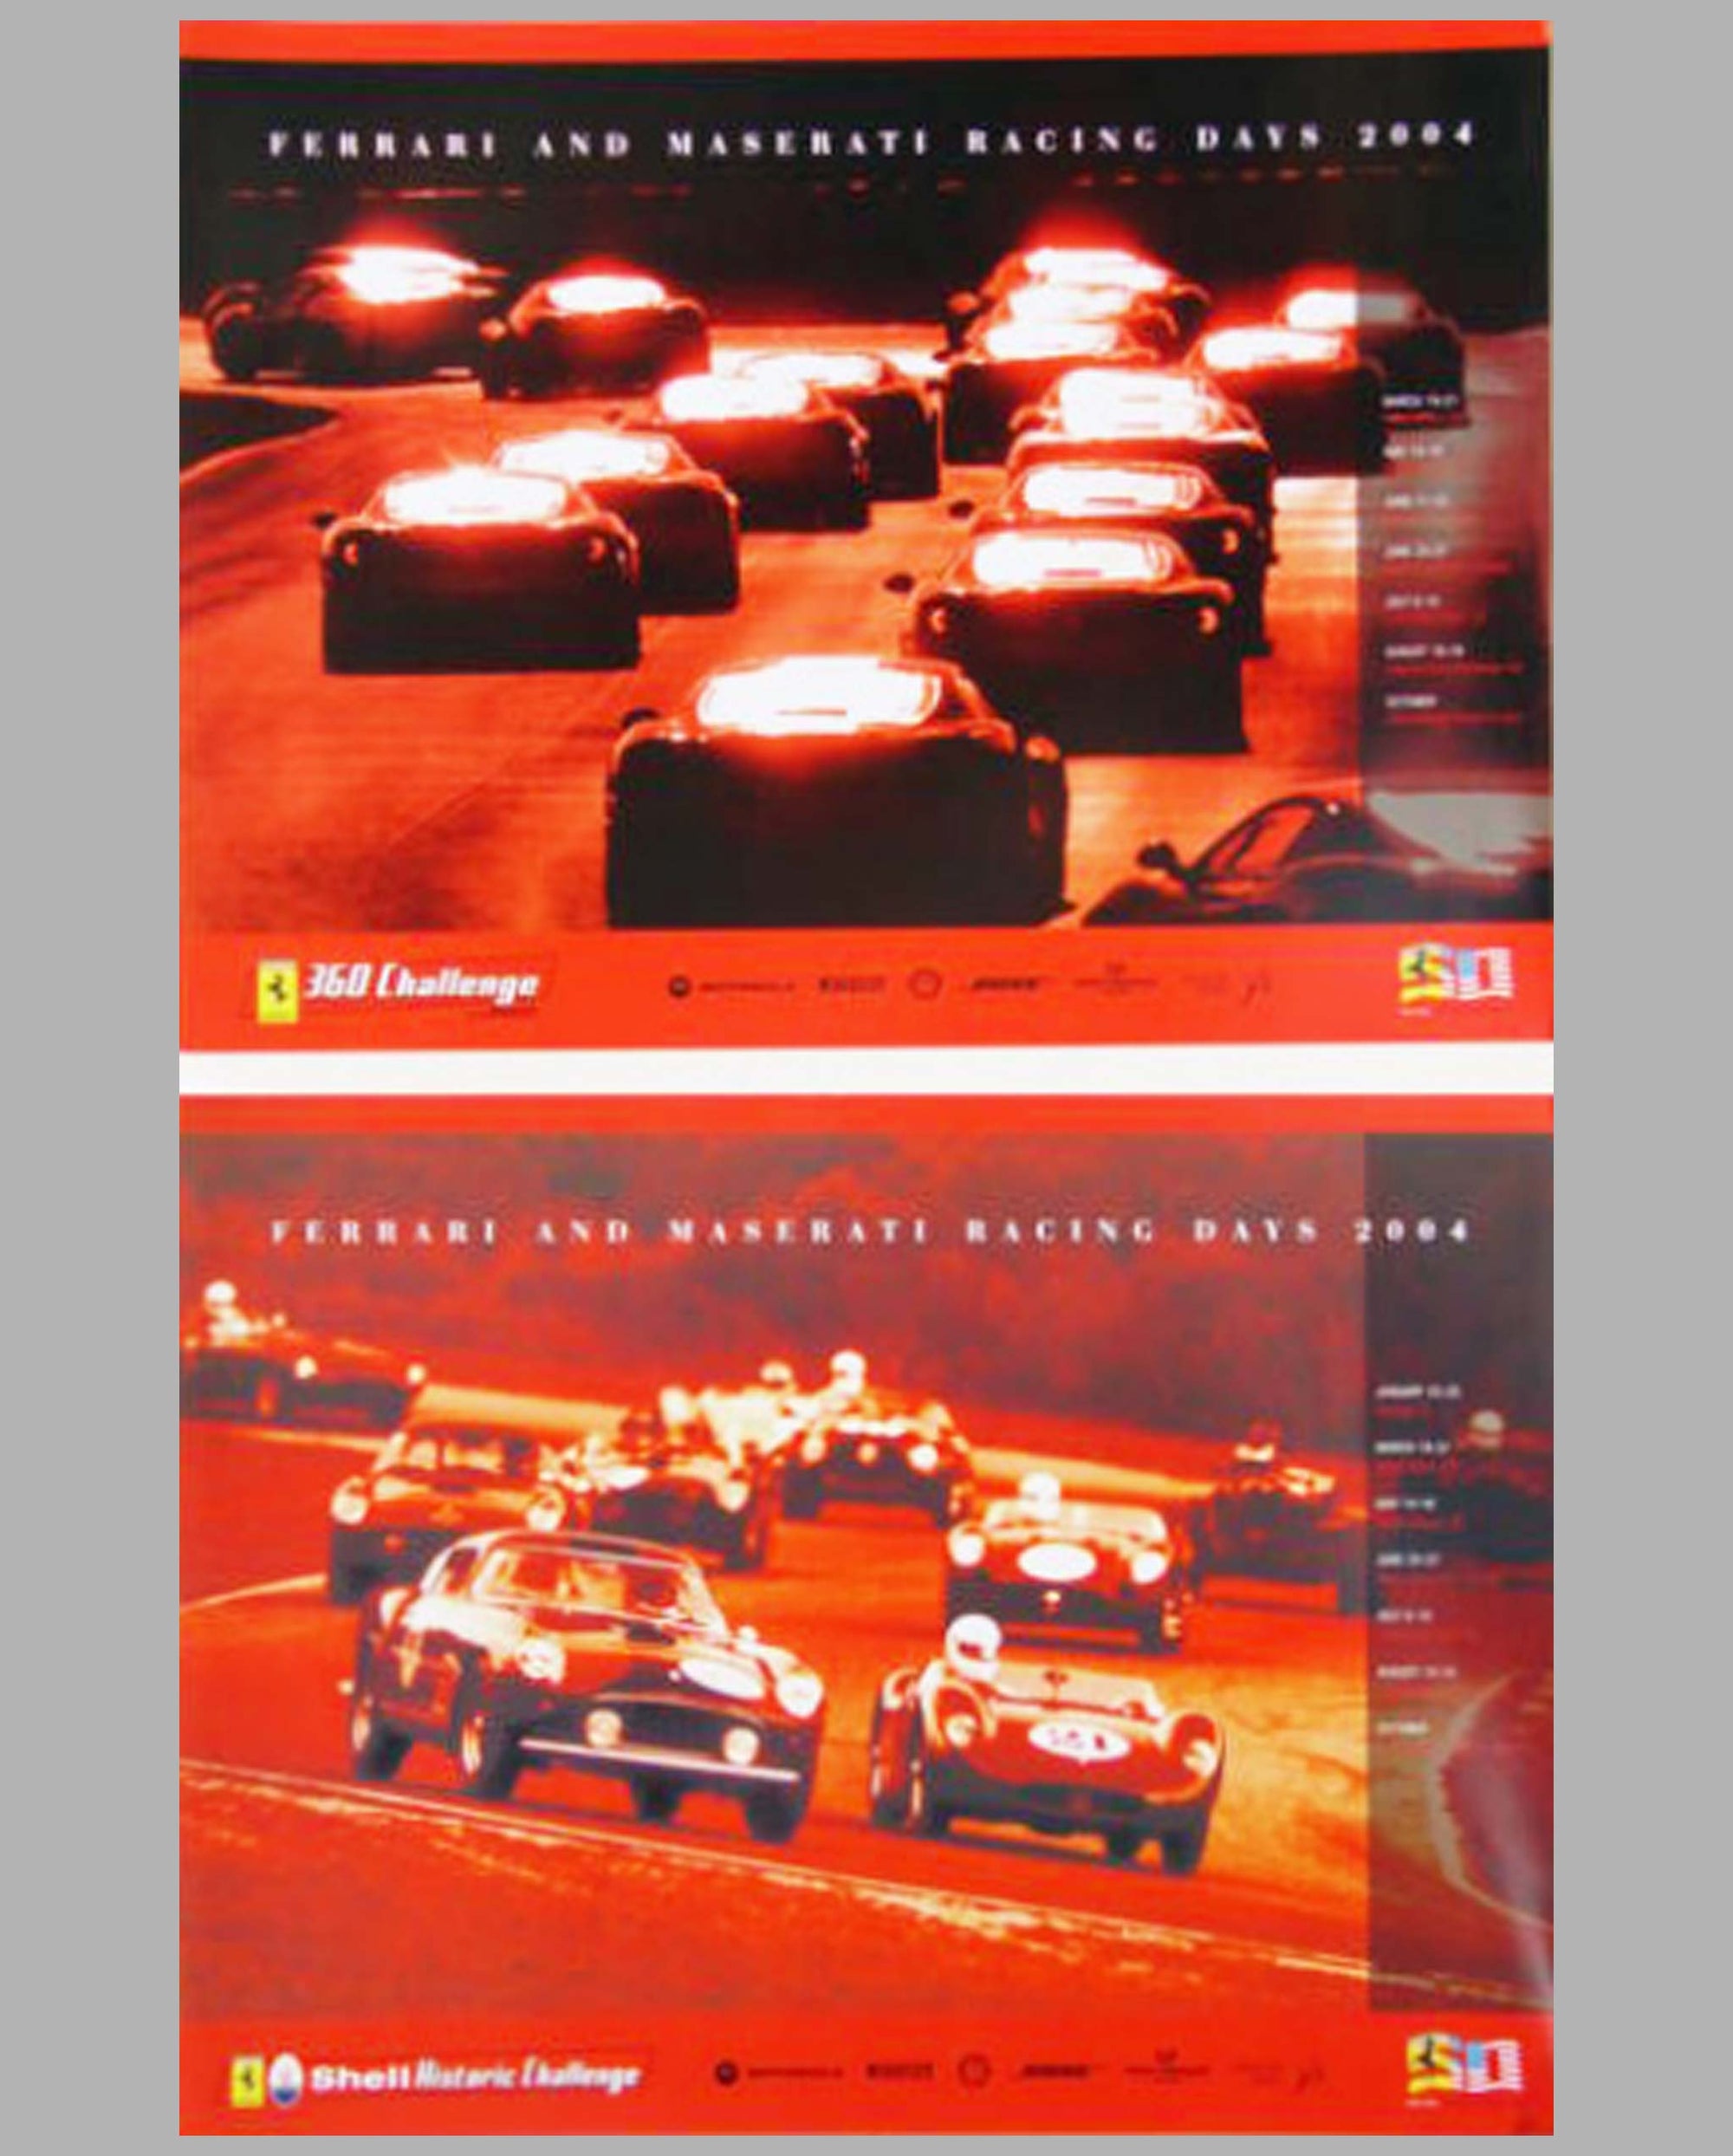 Two Ferrari & Maserati Racing Days 2004 official event posters